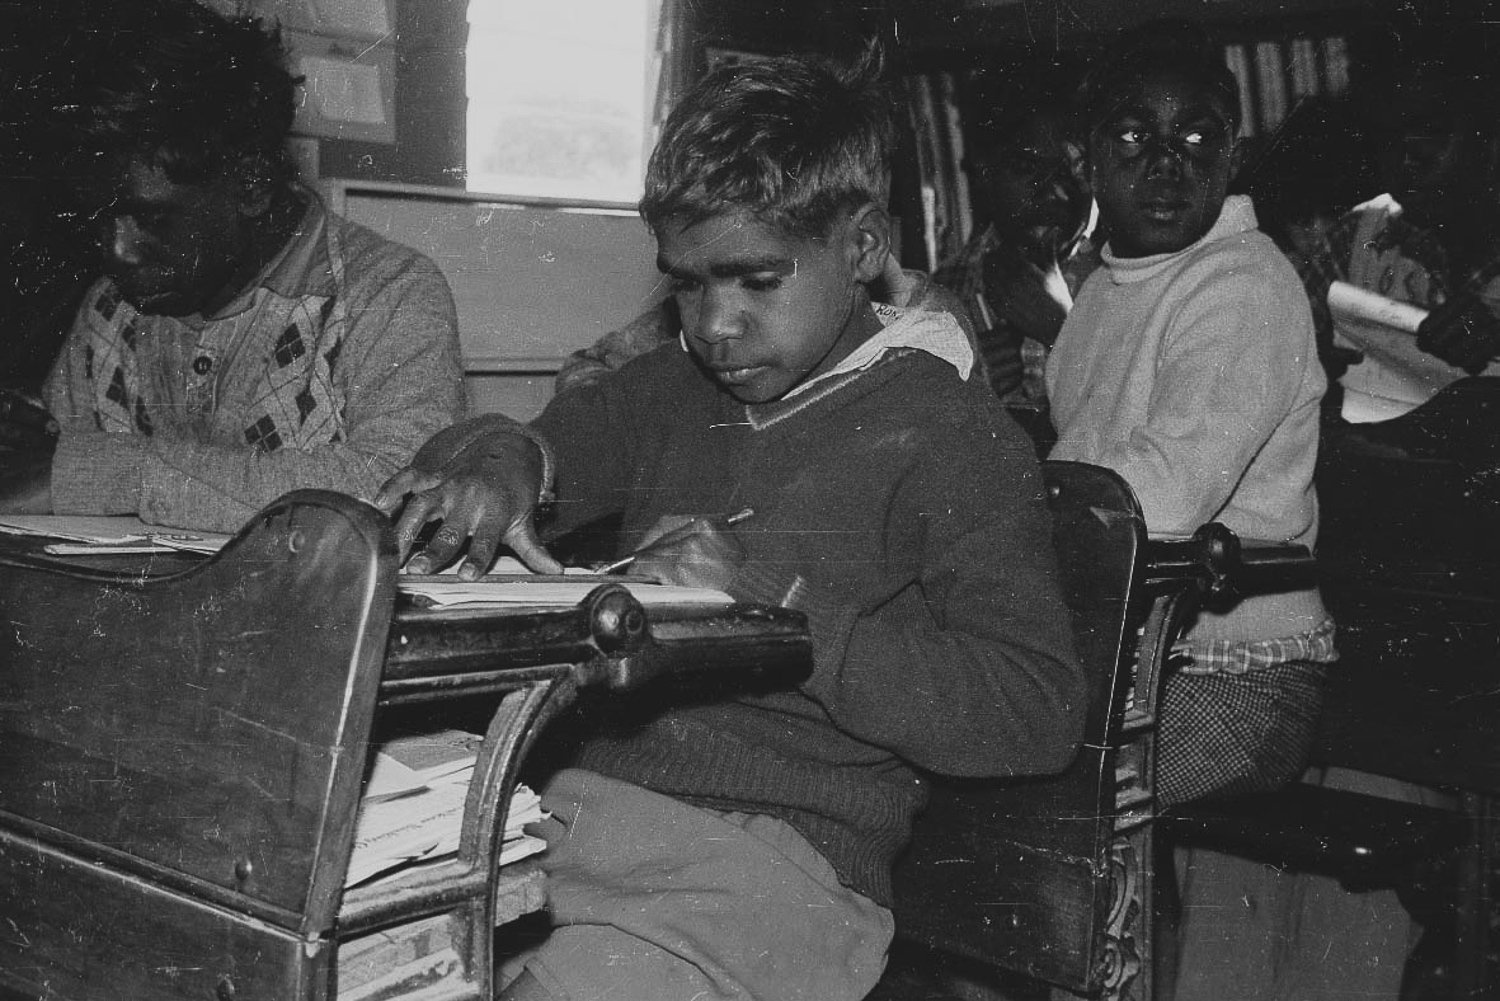 Ron Sinclair (younger brother of Don, above) at the school in Cundeelee. Aboriginal and Torres Strait Islander children all across Australia were forcibly removed from their parents and sent to schools in order to be assimilated. Many children were never returned, becoming what is now known as the ‘Stolen Generations’. Fortunately, the remote location of Cundeelee mission meant that children could still have access to their families, and maintain their language and cultural practices. 